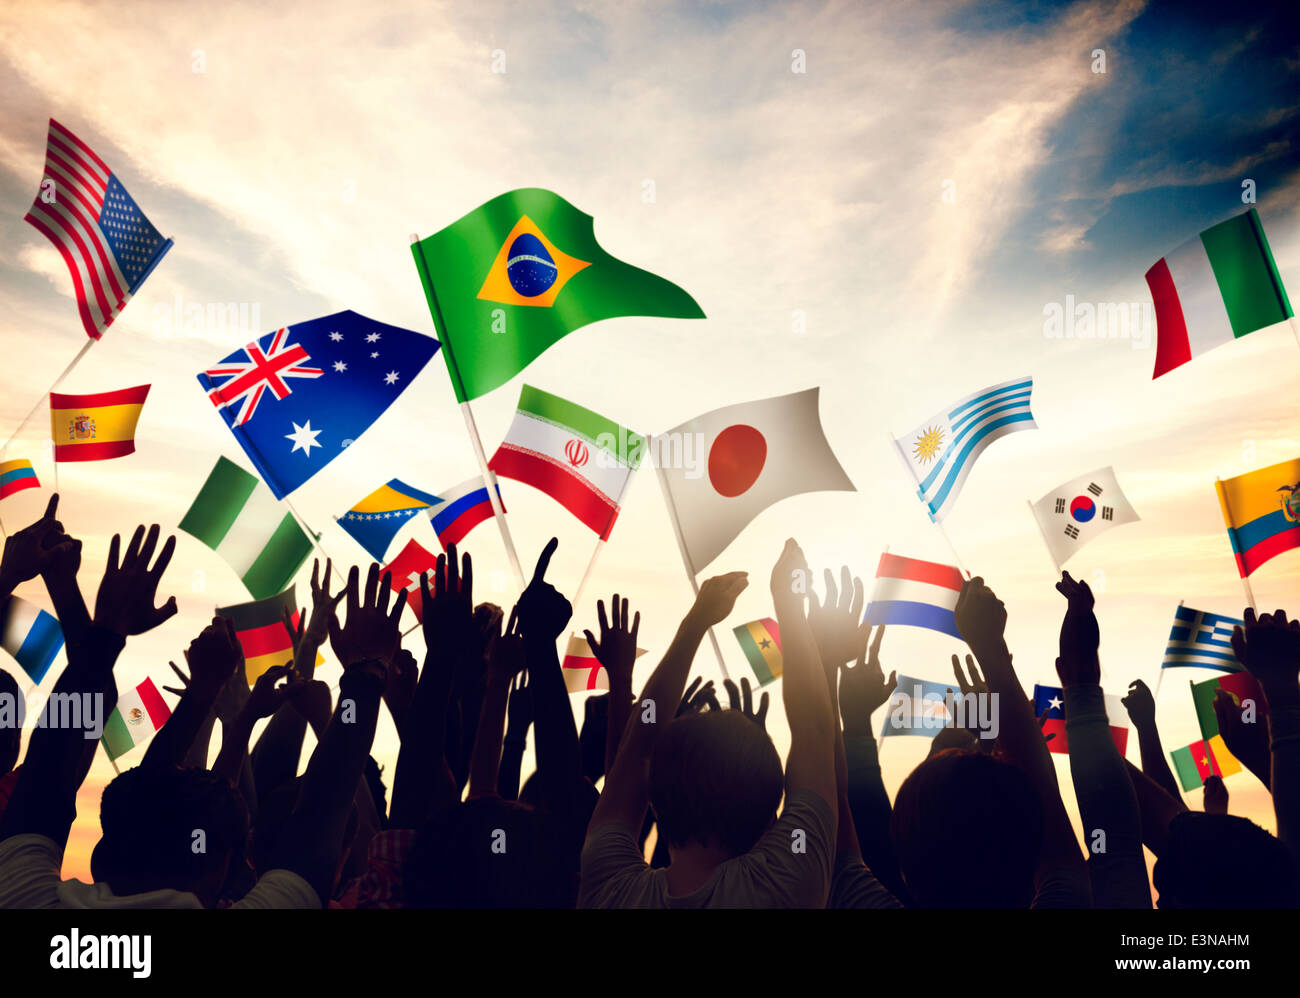 Group of People Waving Flags in World Cup Theme Stock Photo